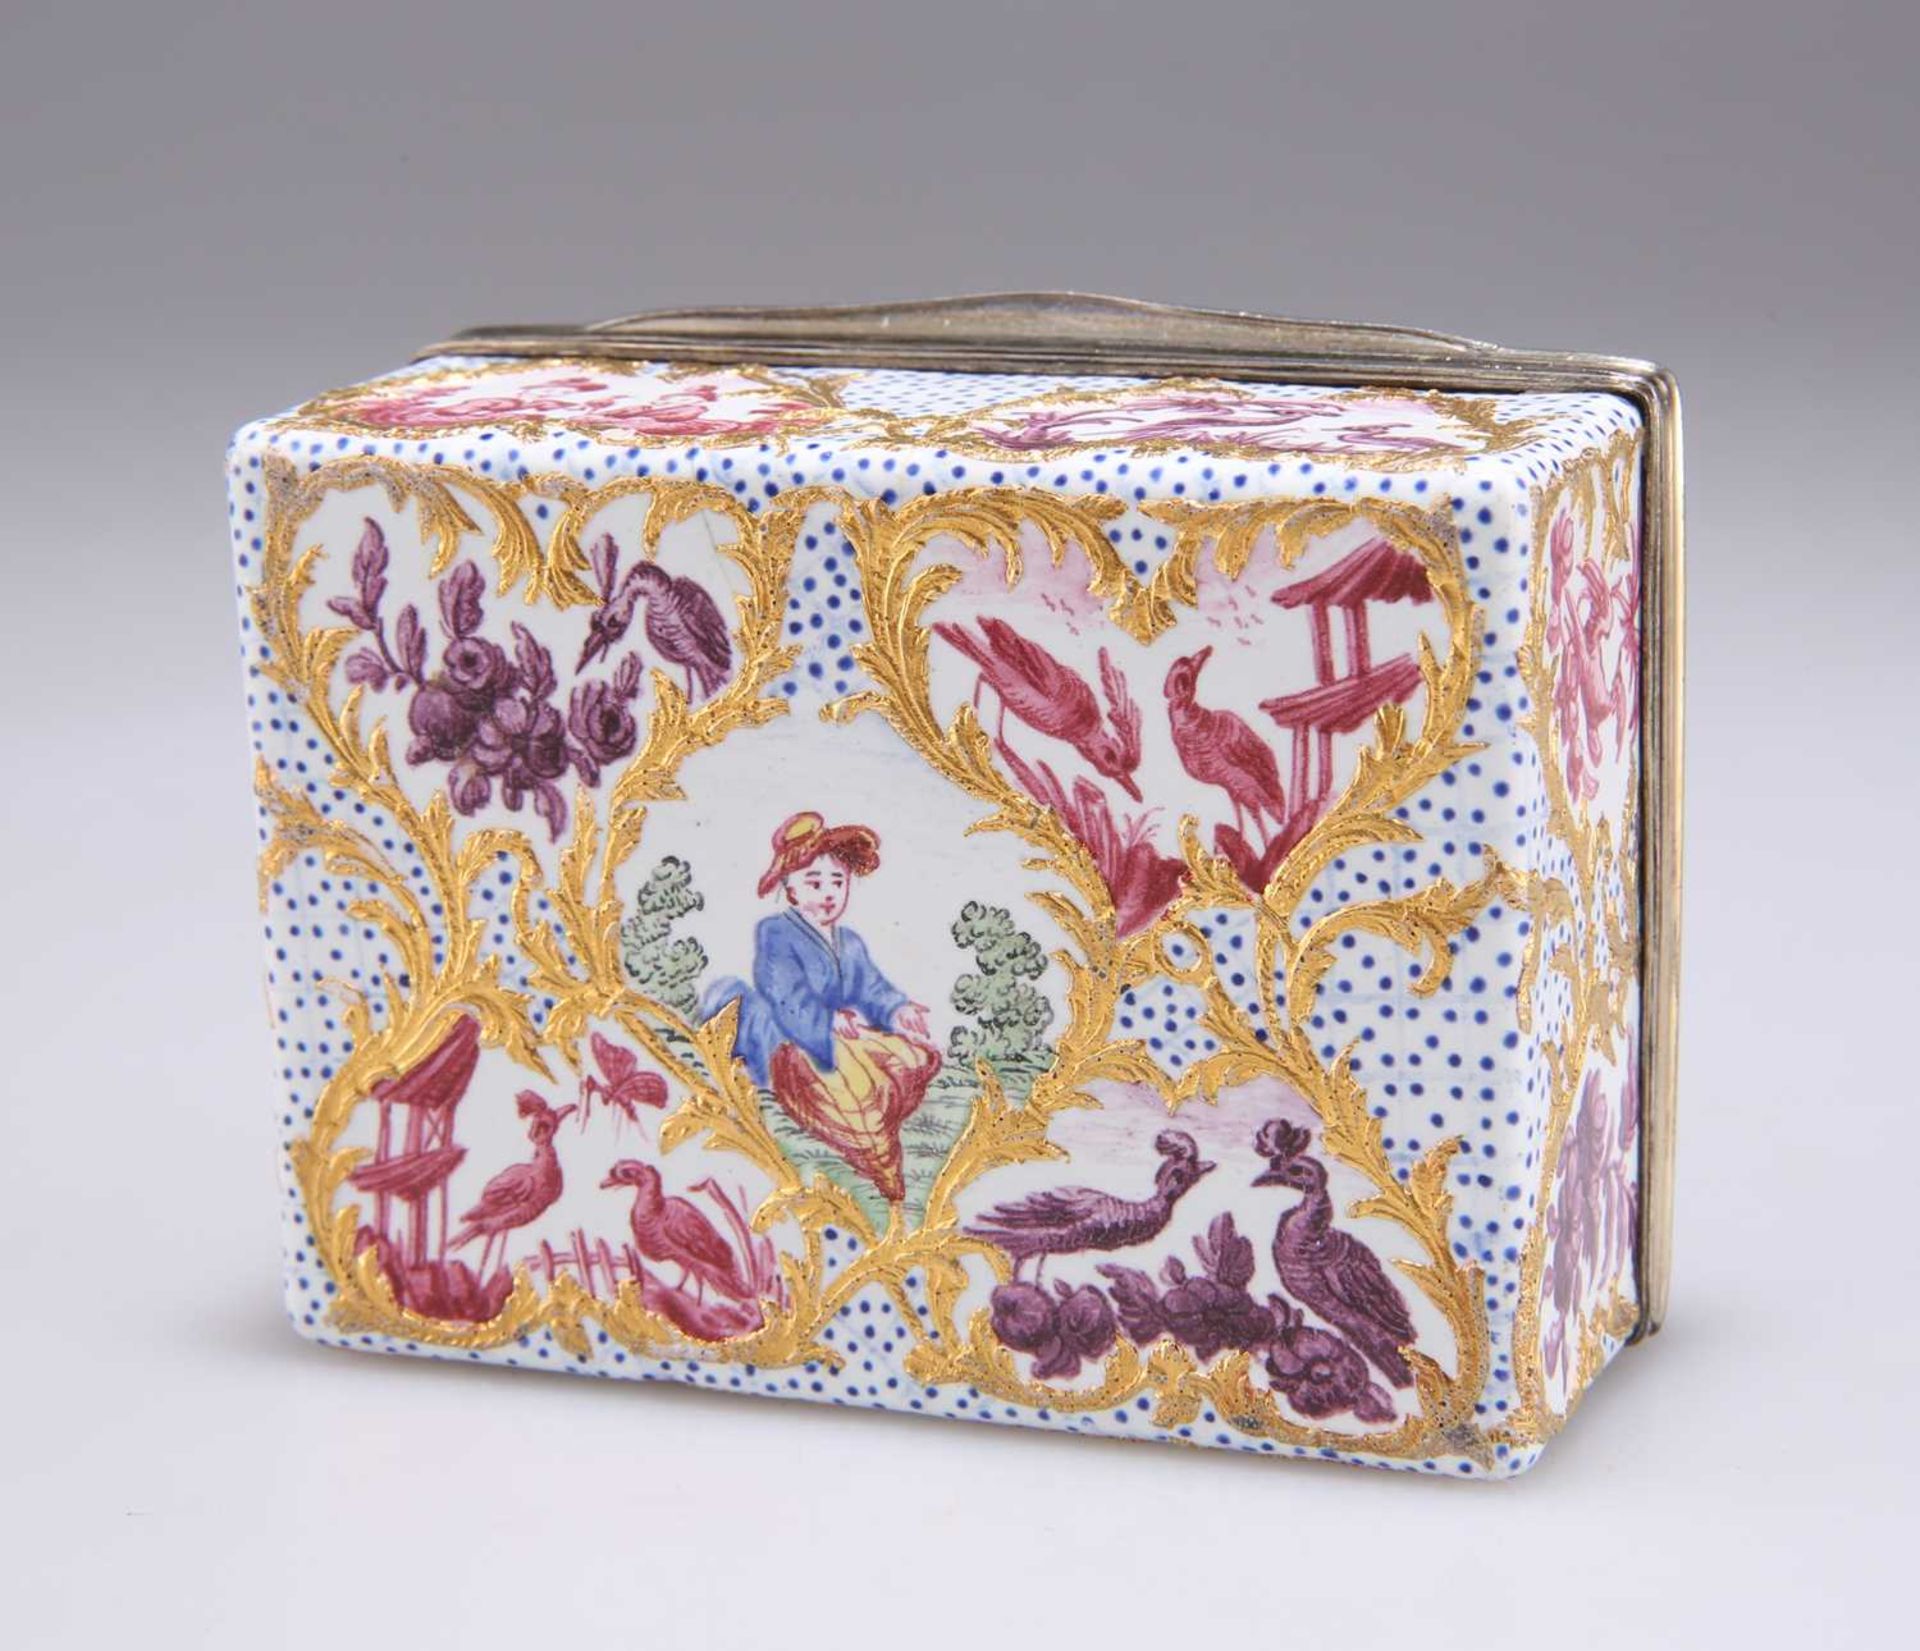 A SILVER-MOUNTED CHINOISERIE ENAMEL SNUFF BOX, PRESUMABLY PIERRE FROMERY, BERLIN AND/OR PARIS - Image 3 of 3